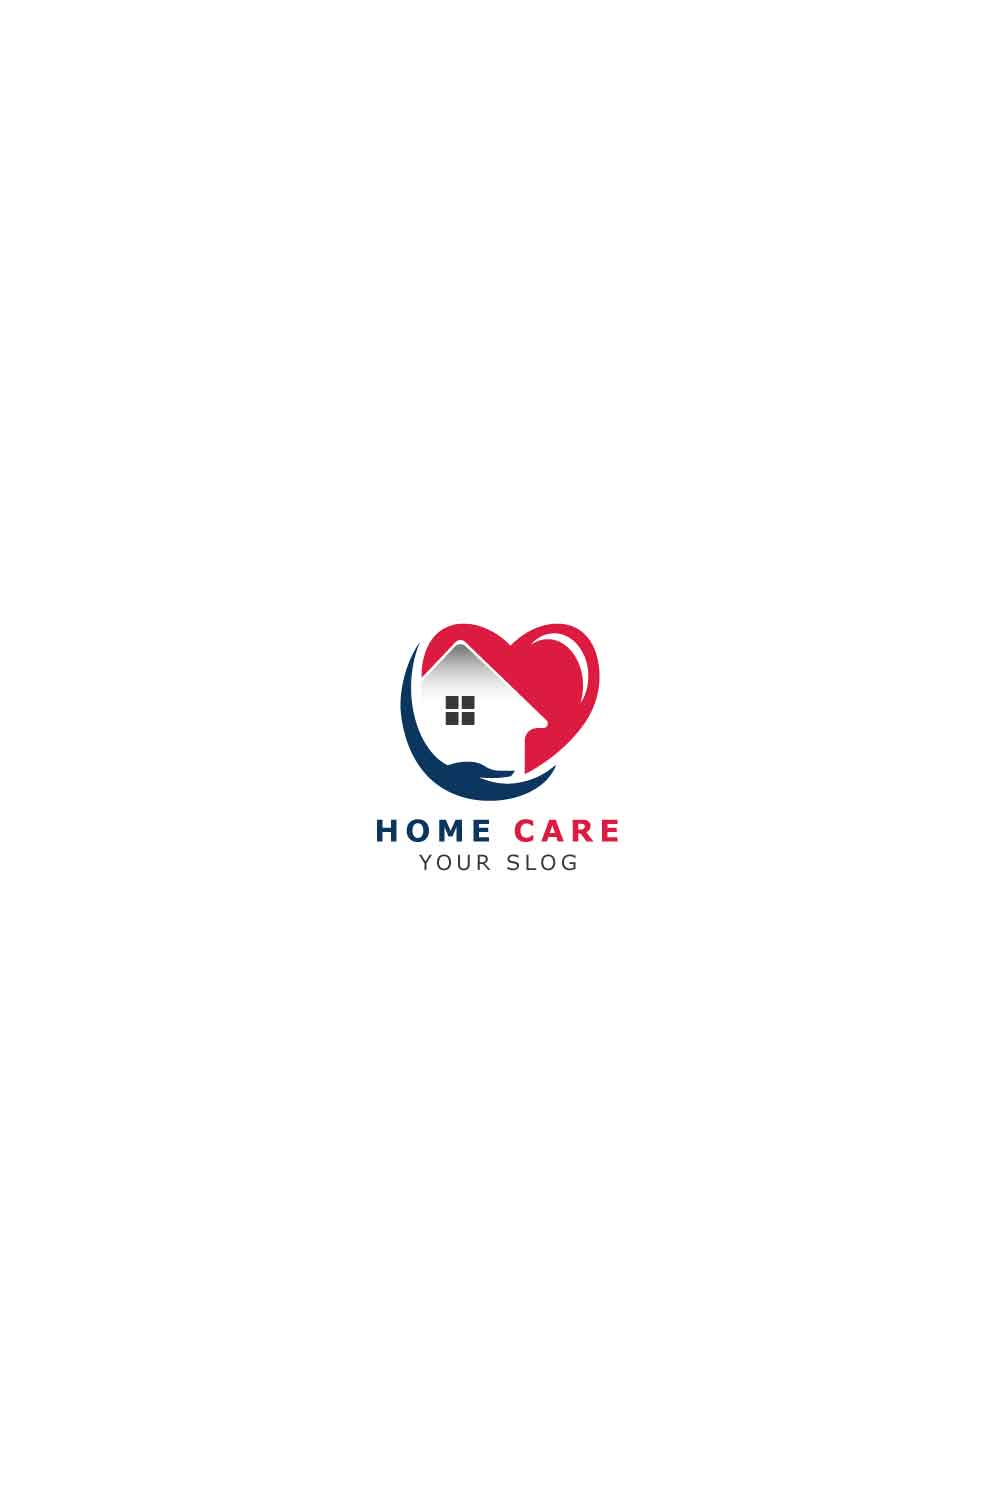 Home Care Logo Pinterest collage image.